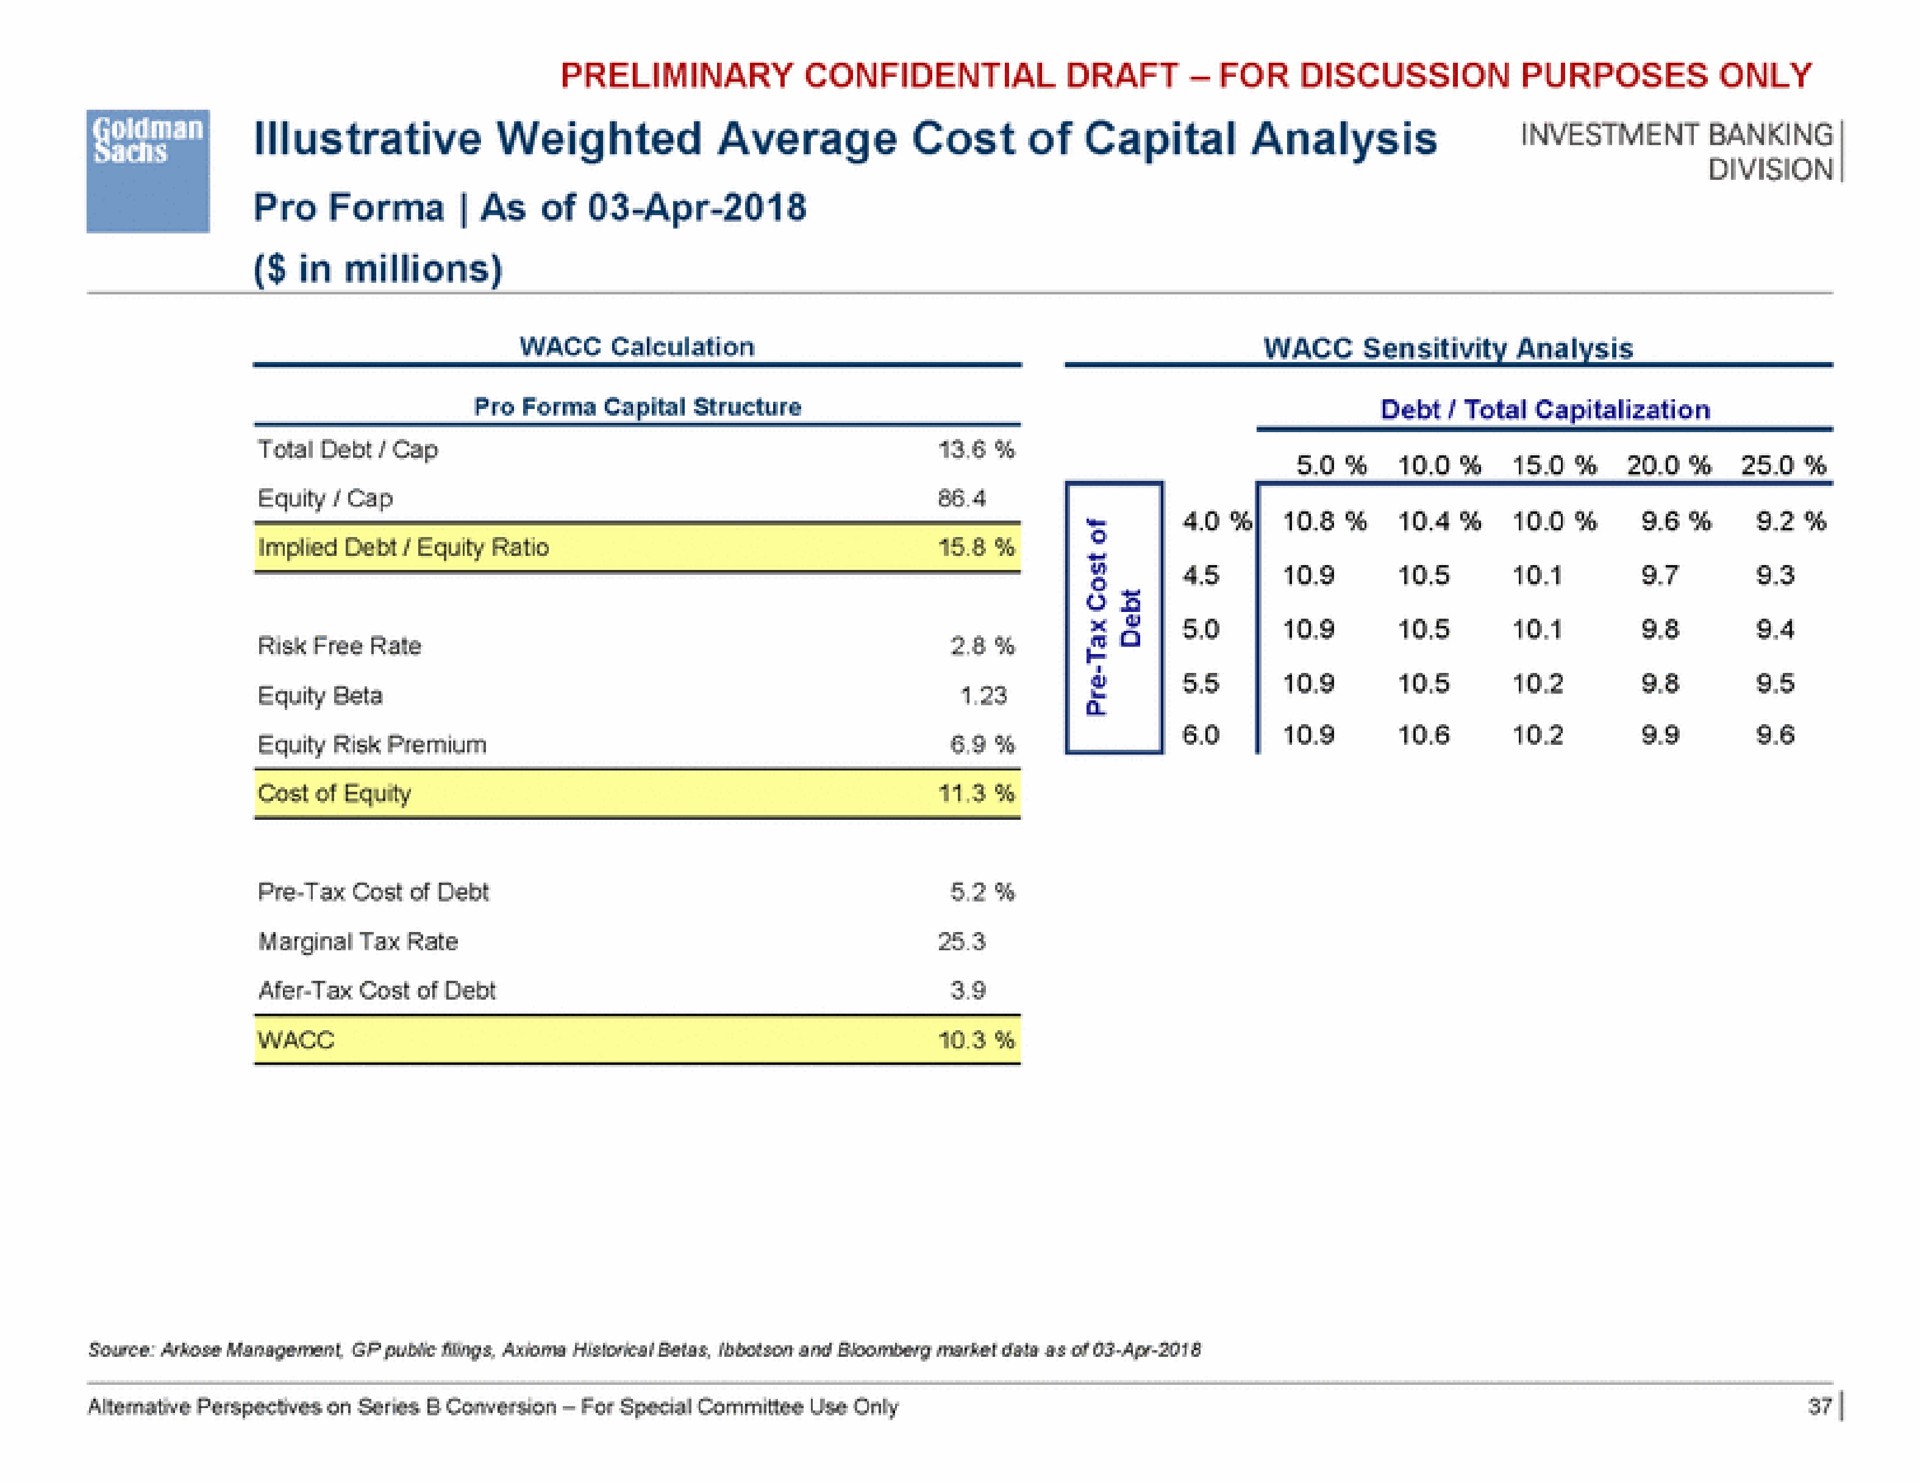 illustrative weighted average cost of capital analysis | Goldman Sachs